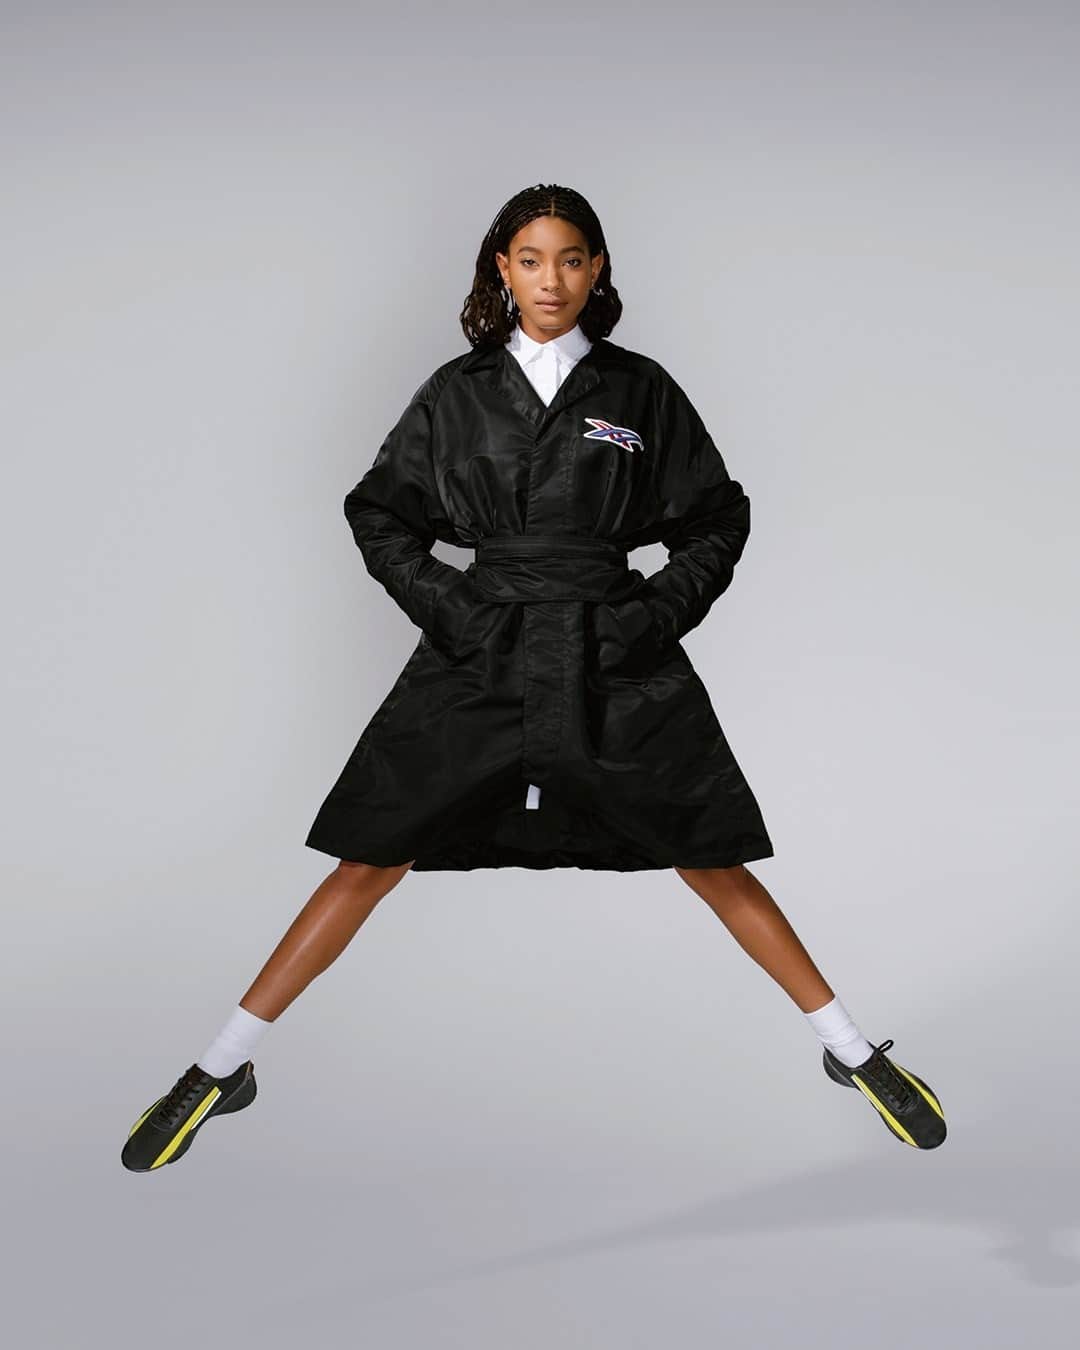 Onitsuka Tigerのインスタグラム：「Our SS21 collection expressed by Willow Smith. Onitsuka Tiger's DNA is imbued in every single garment as well as the logo and other details.  @willowsmith @westbrook #WillowSmith #BrandAmbassador #OnitsukaTiger #OnitsukaTigerSS21」